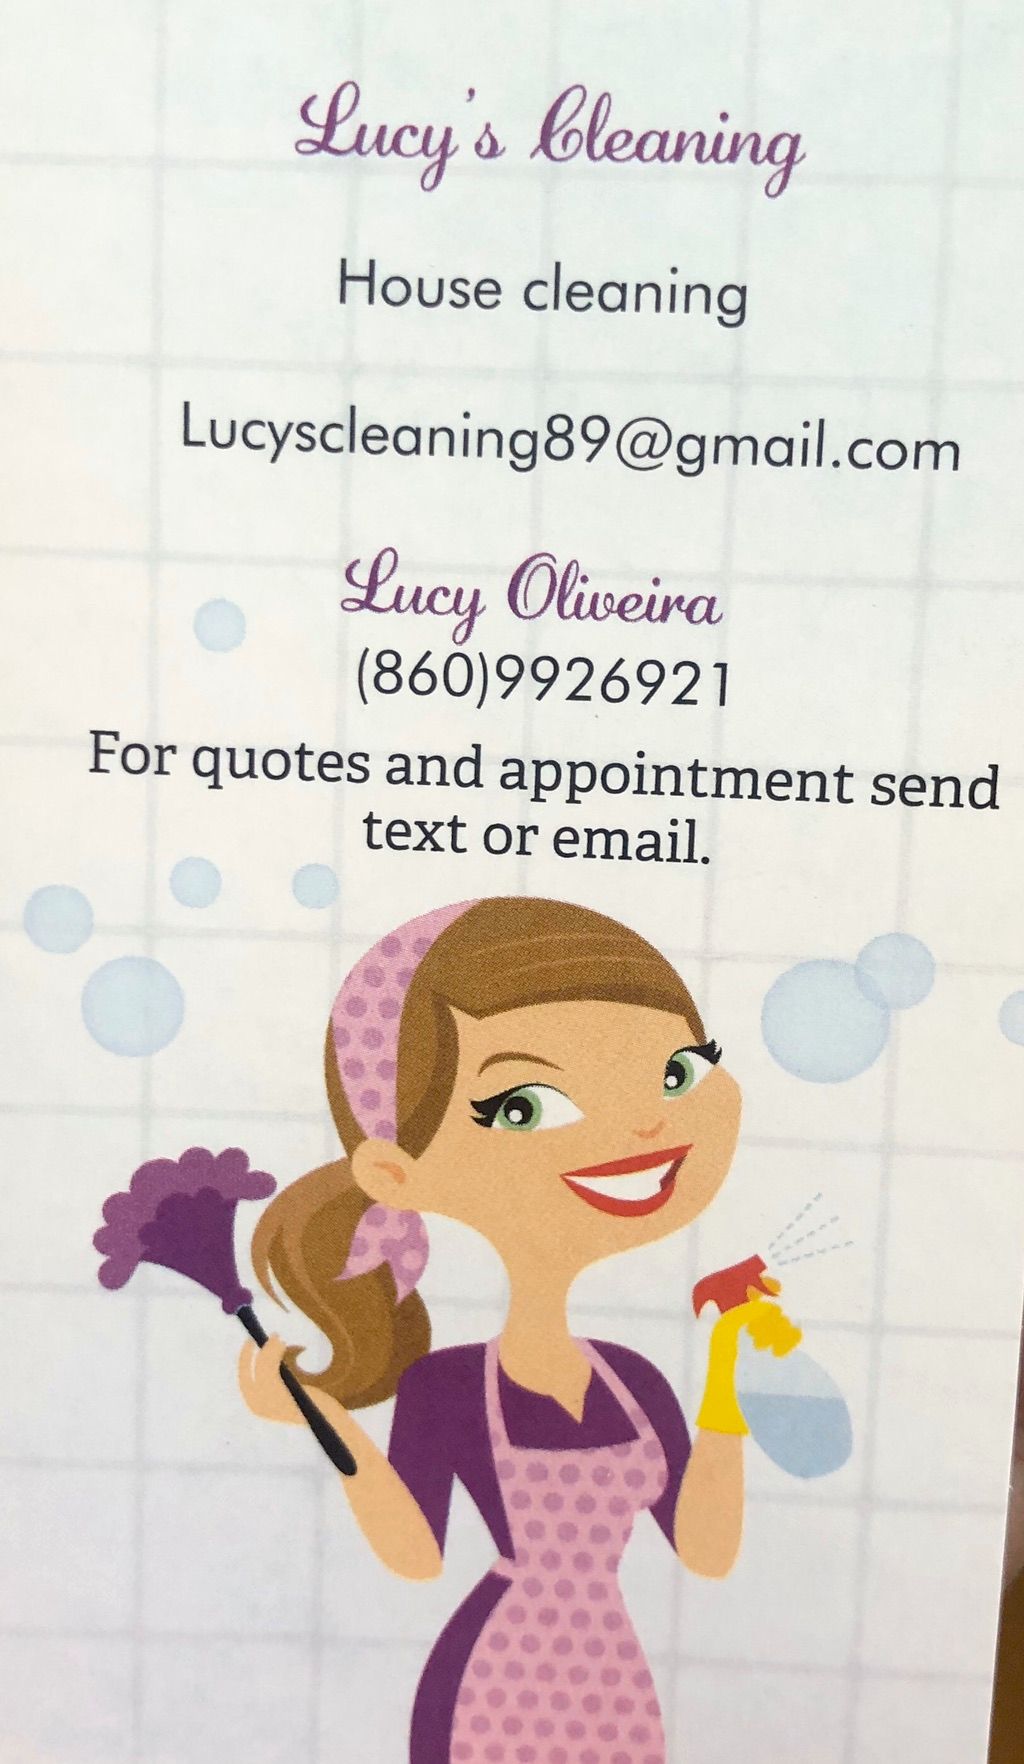 Lucy’s Cleaning